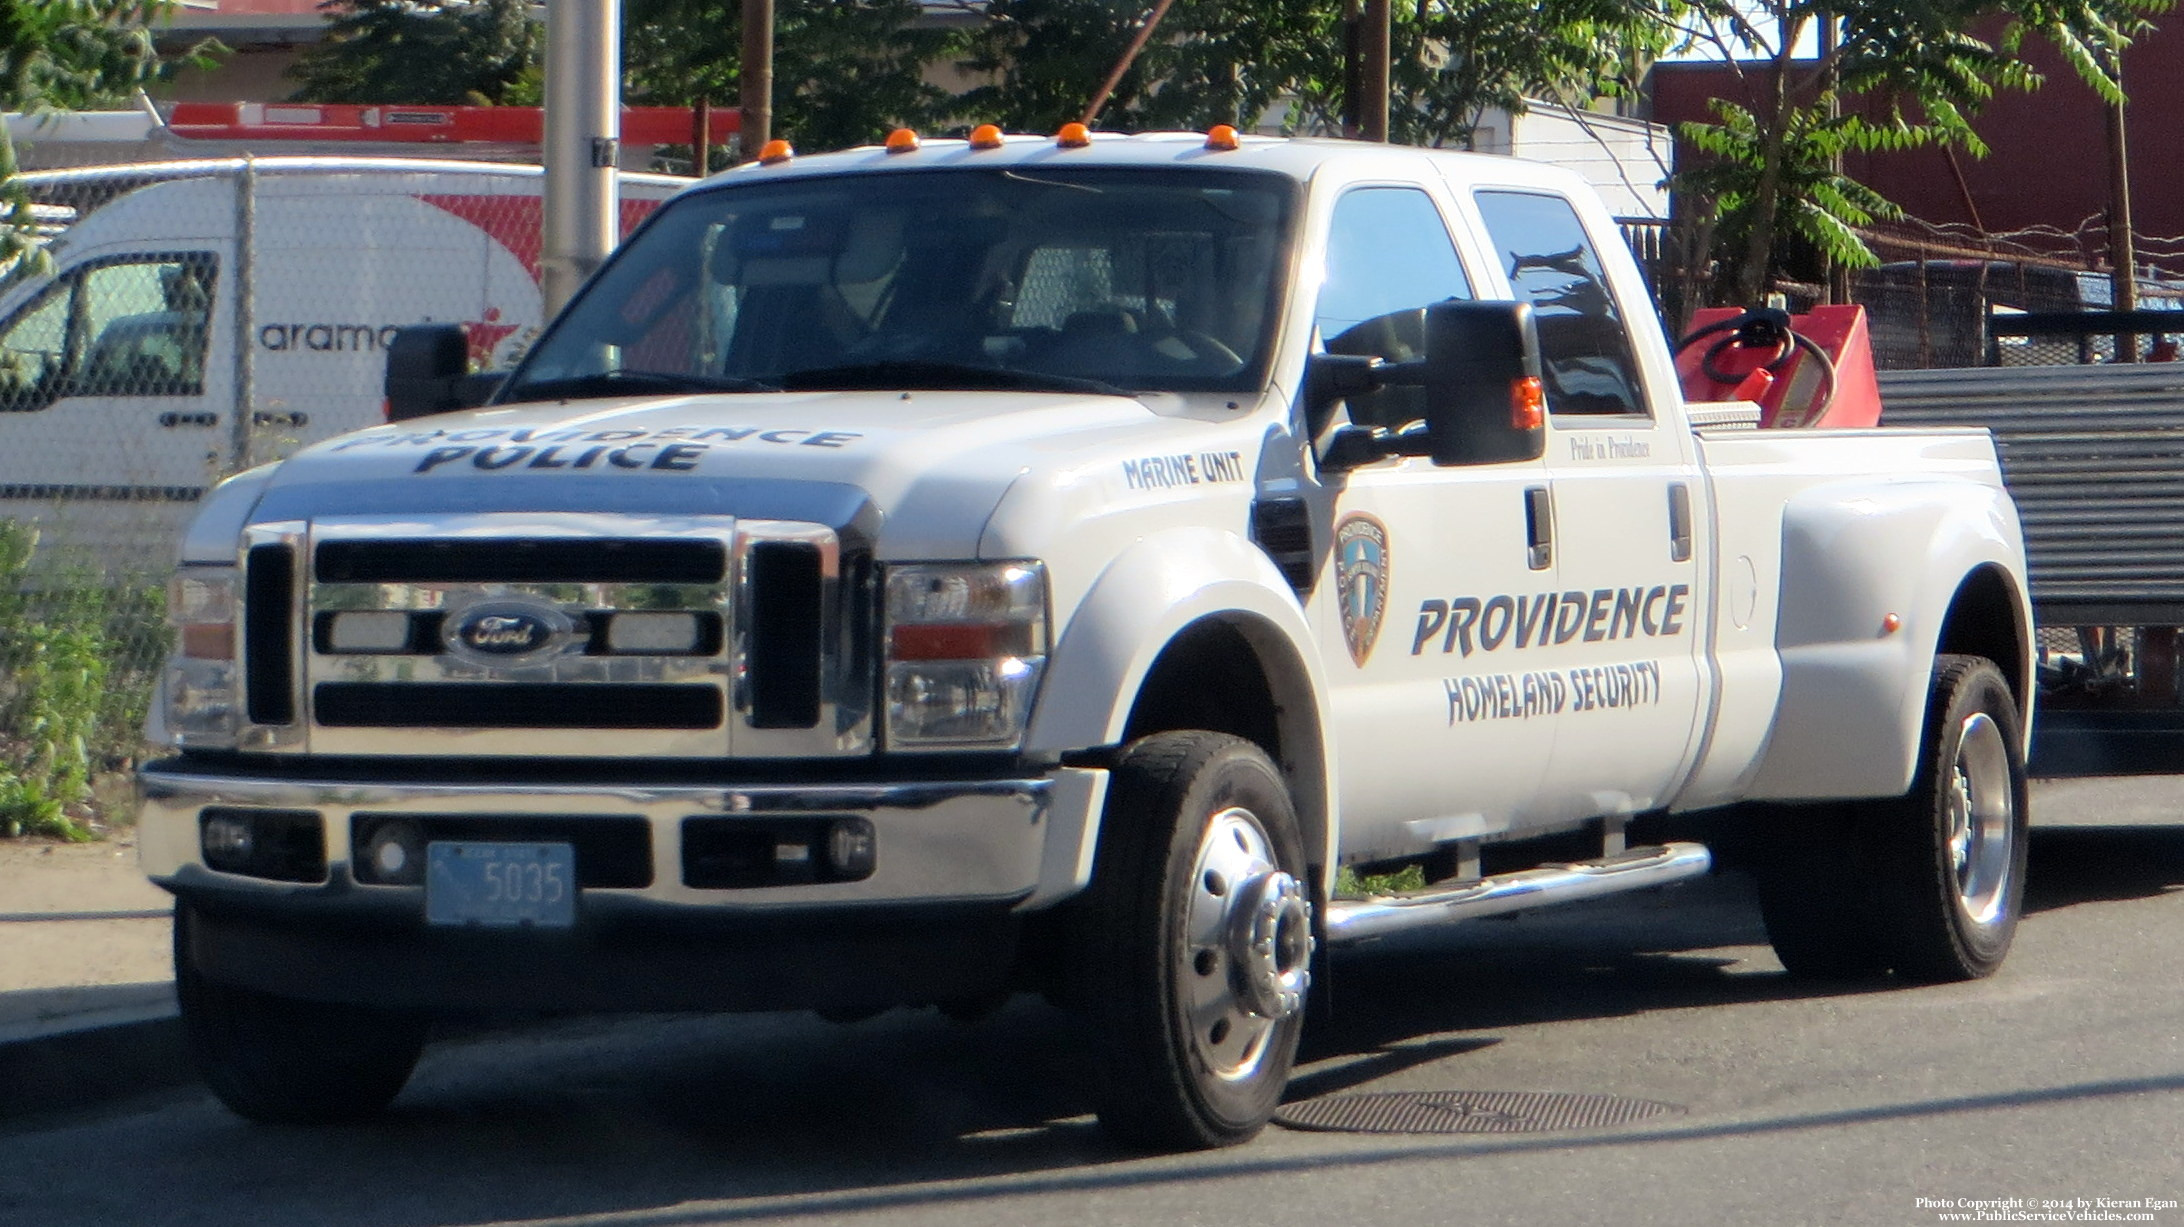 A photo  of Providence Police
            Truck 5035, a 2008-2010 Ford F-450 Crew Cab             taken by Kieran Egan